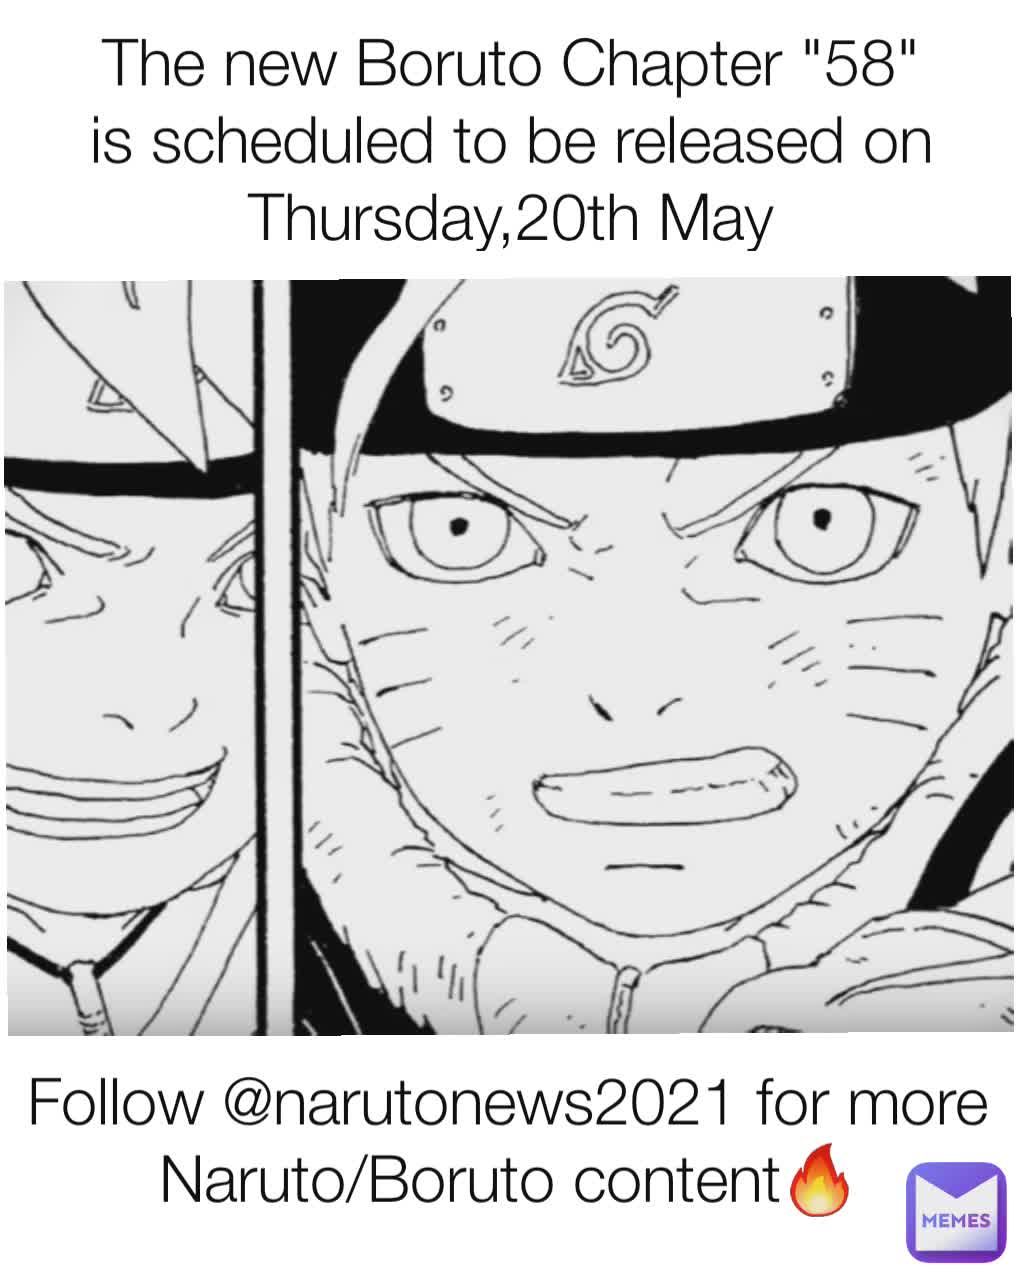 Follow @narutonews2021 for more Naruto/Boruto content🔥 The new Boruto Chapter "58" is scheduled to be released on Thursday,20th May